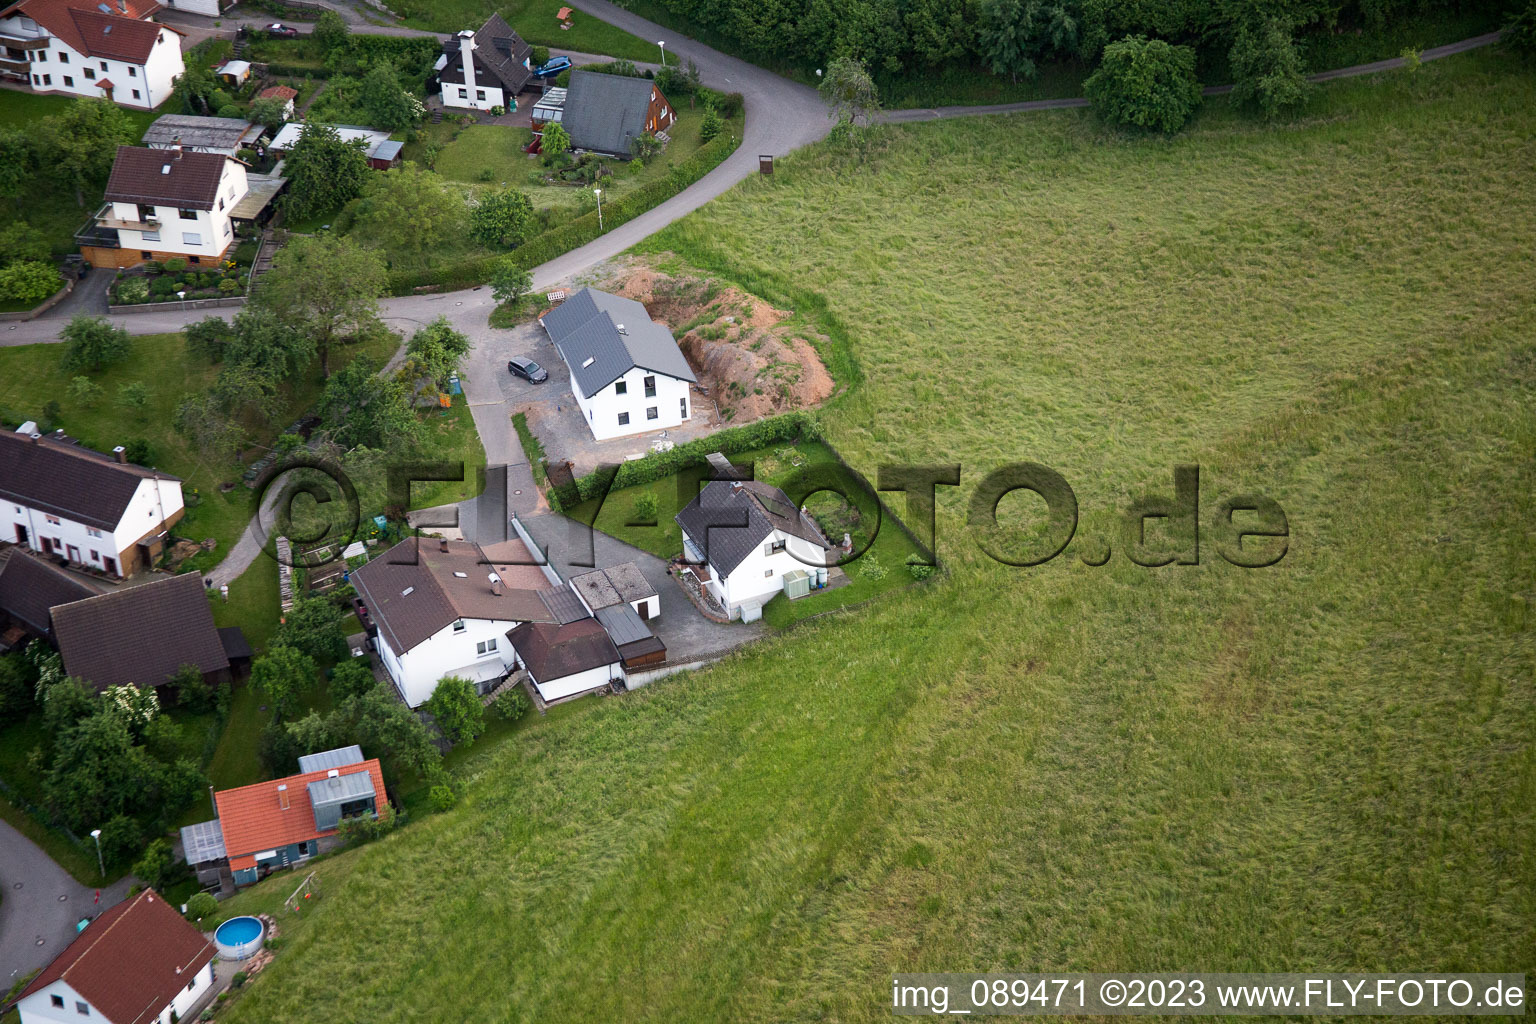 Brombach in the state Baden-Wuerttemberg, Germany from above